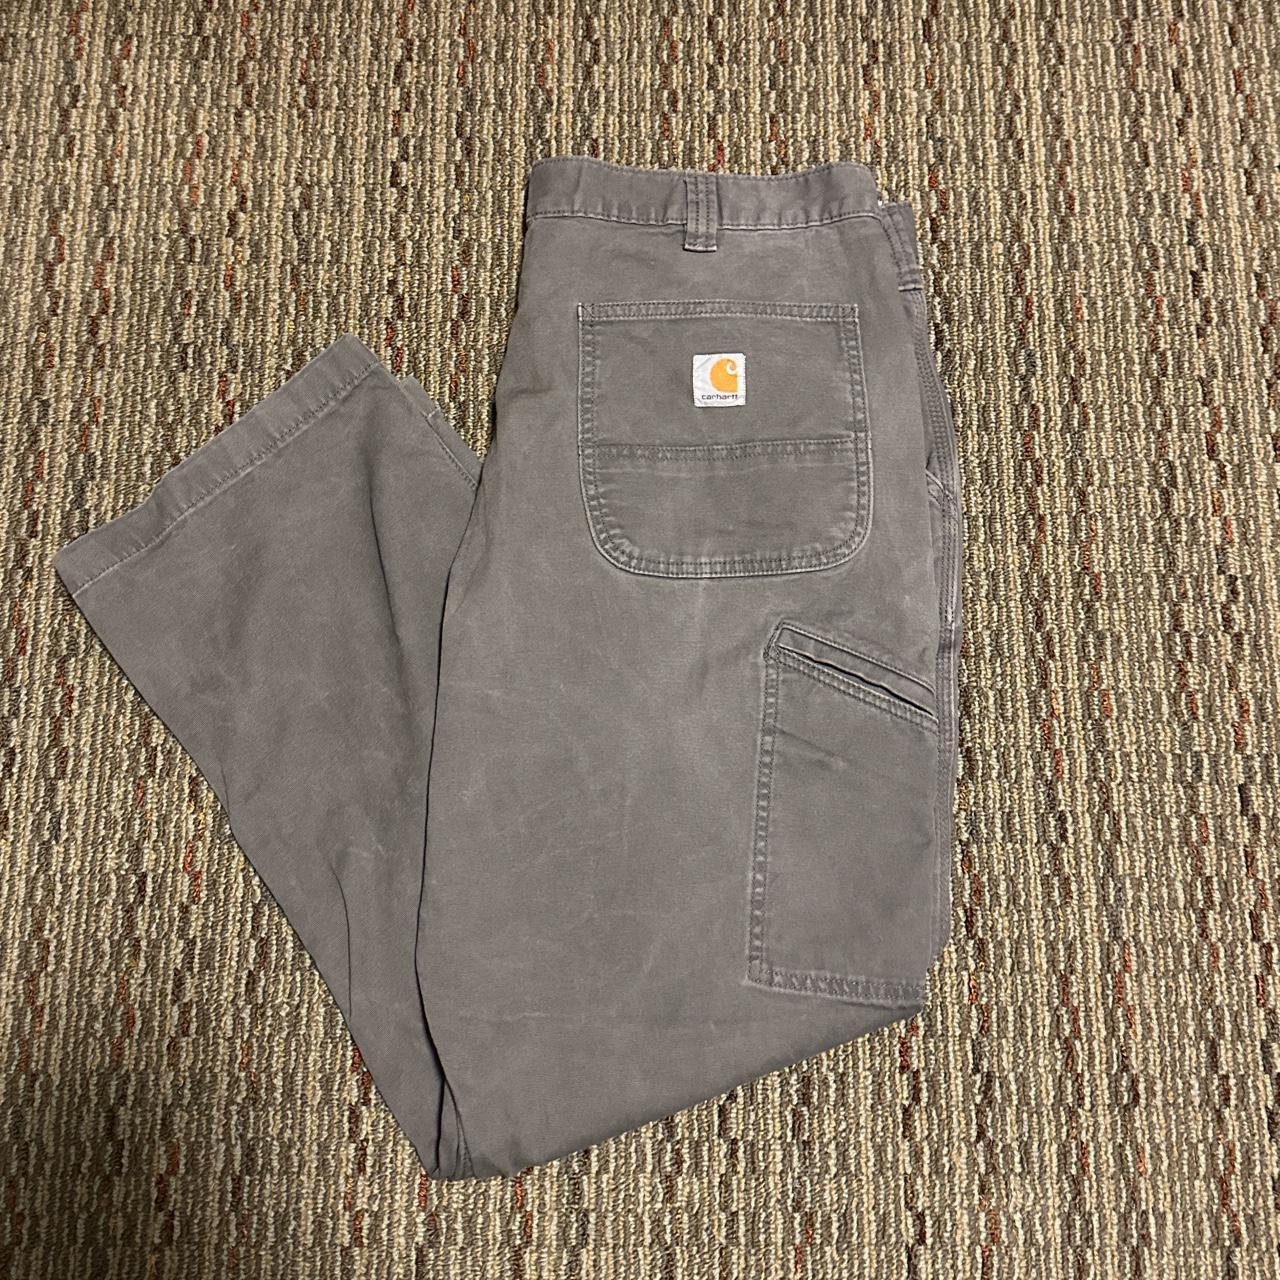 Carhartt workwear pants Relaxed fit 38x30 Has a... - Depop